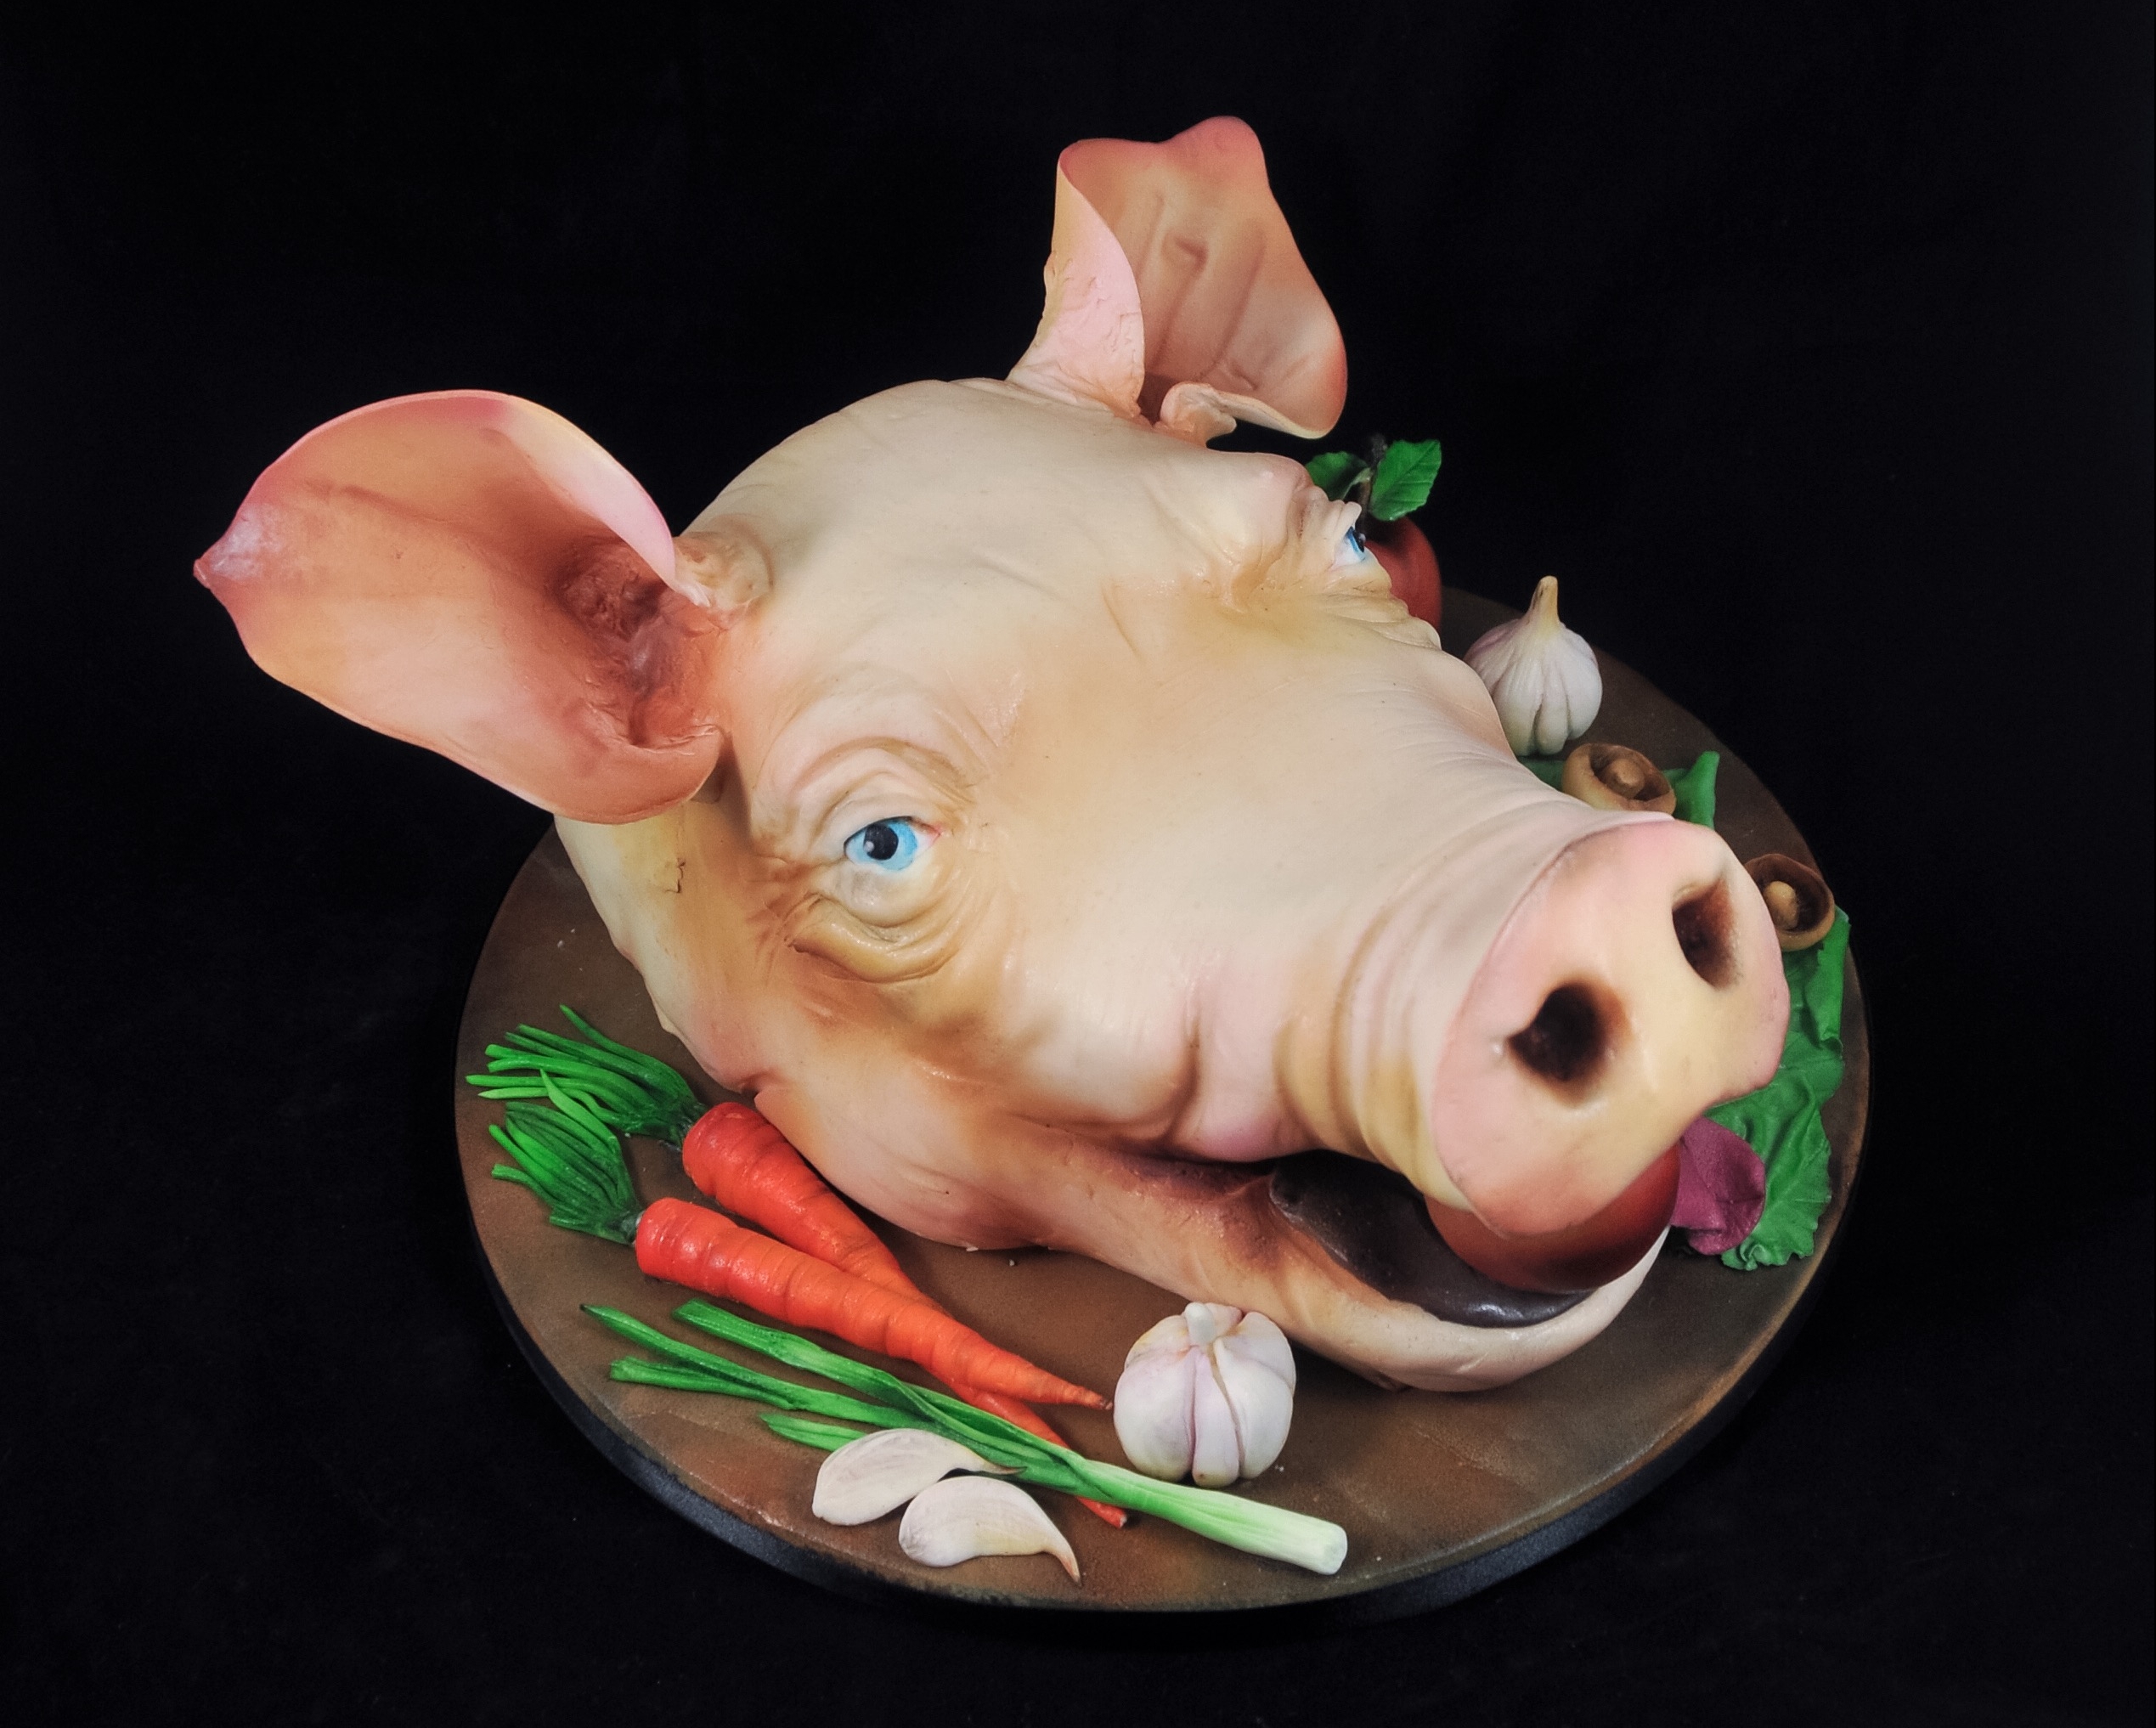 Sculpting, 3D Pig carrot cake with Sugarcraft Veges